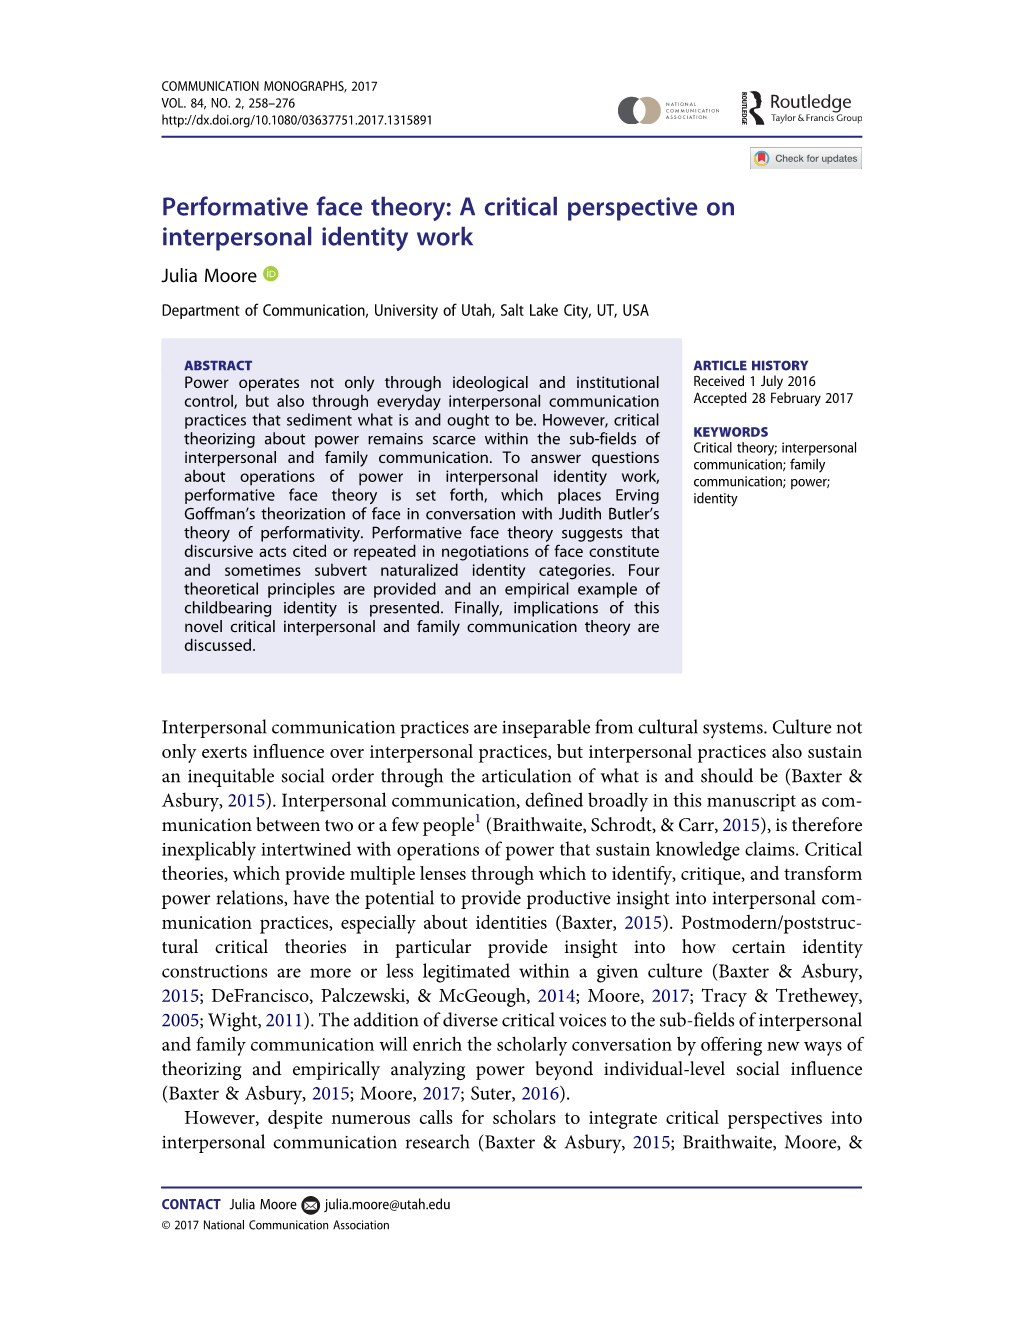 Performative Face Theory: a Critical Perspective on Interpersonal Identity Work Julia Moore Department of Communication, University of Utah, Salt Lake City, UT, USA